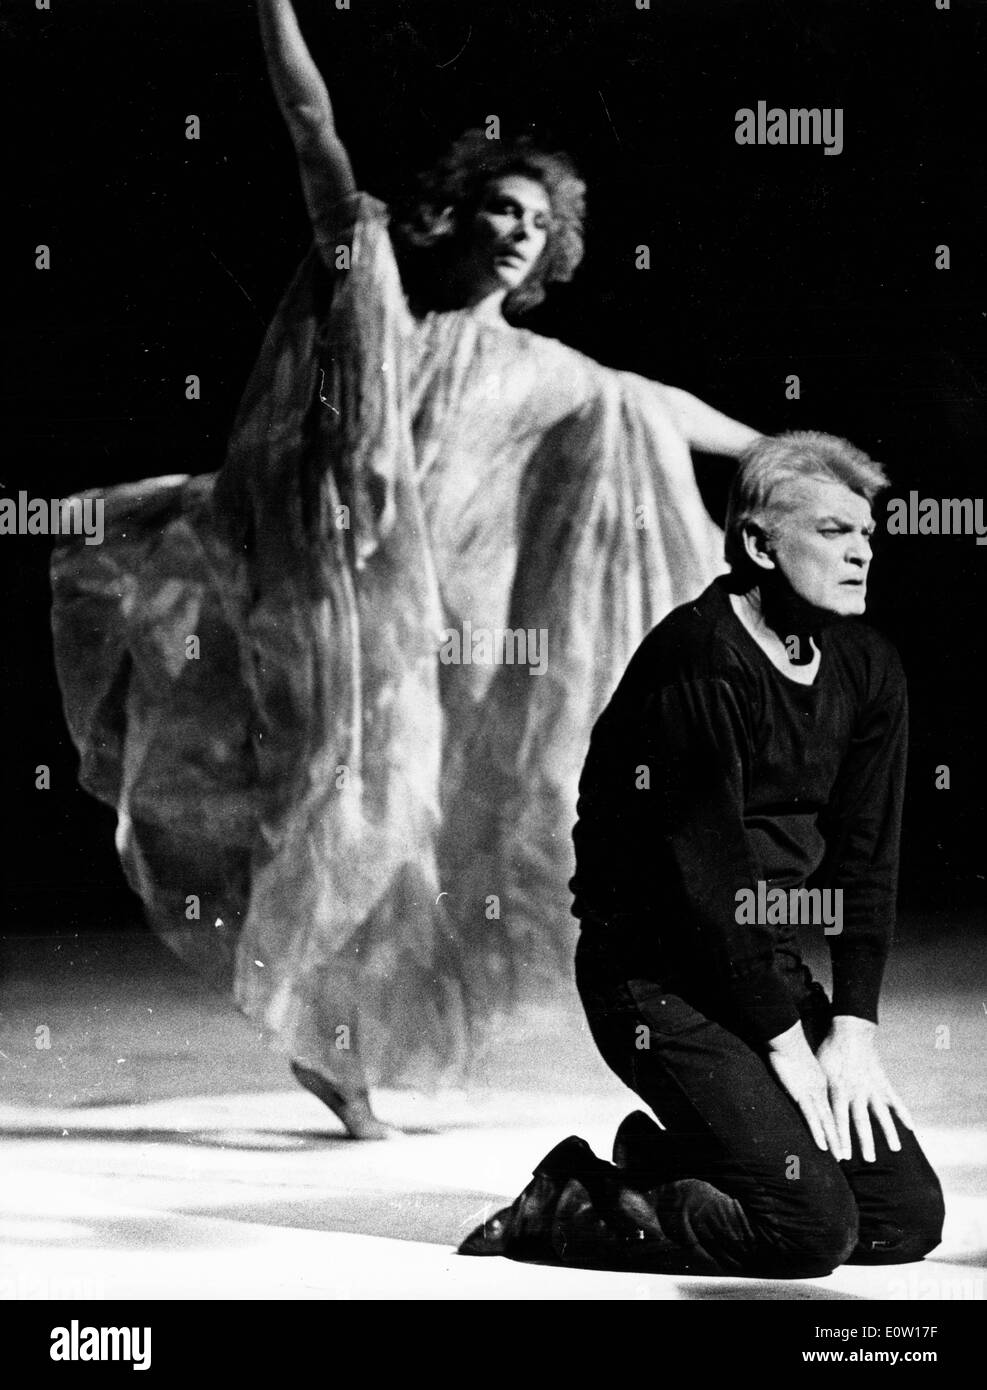 Actor Jean Marais on stage with a dancer during a performance Stock Photo